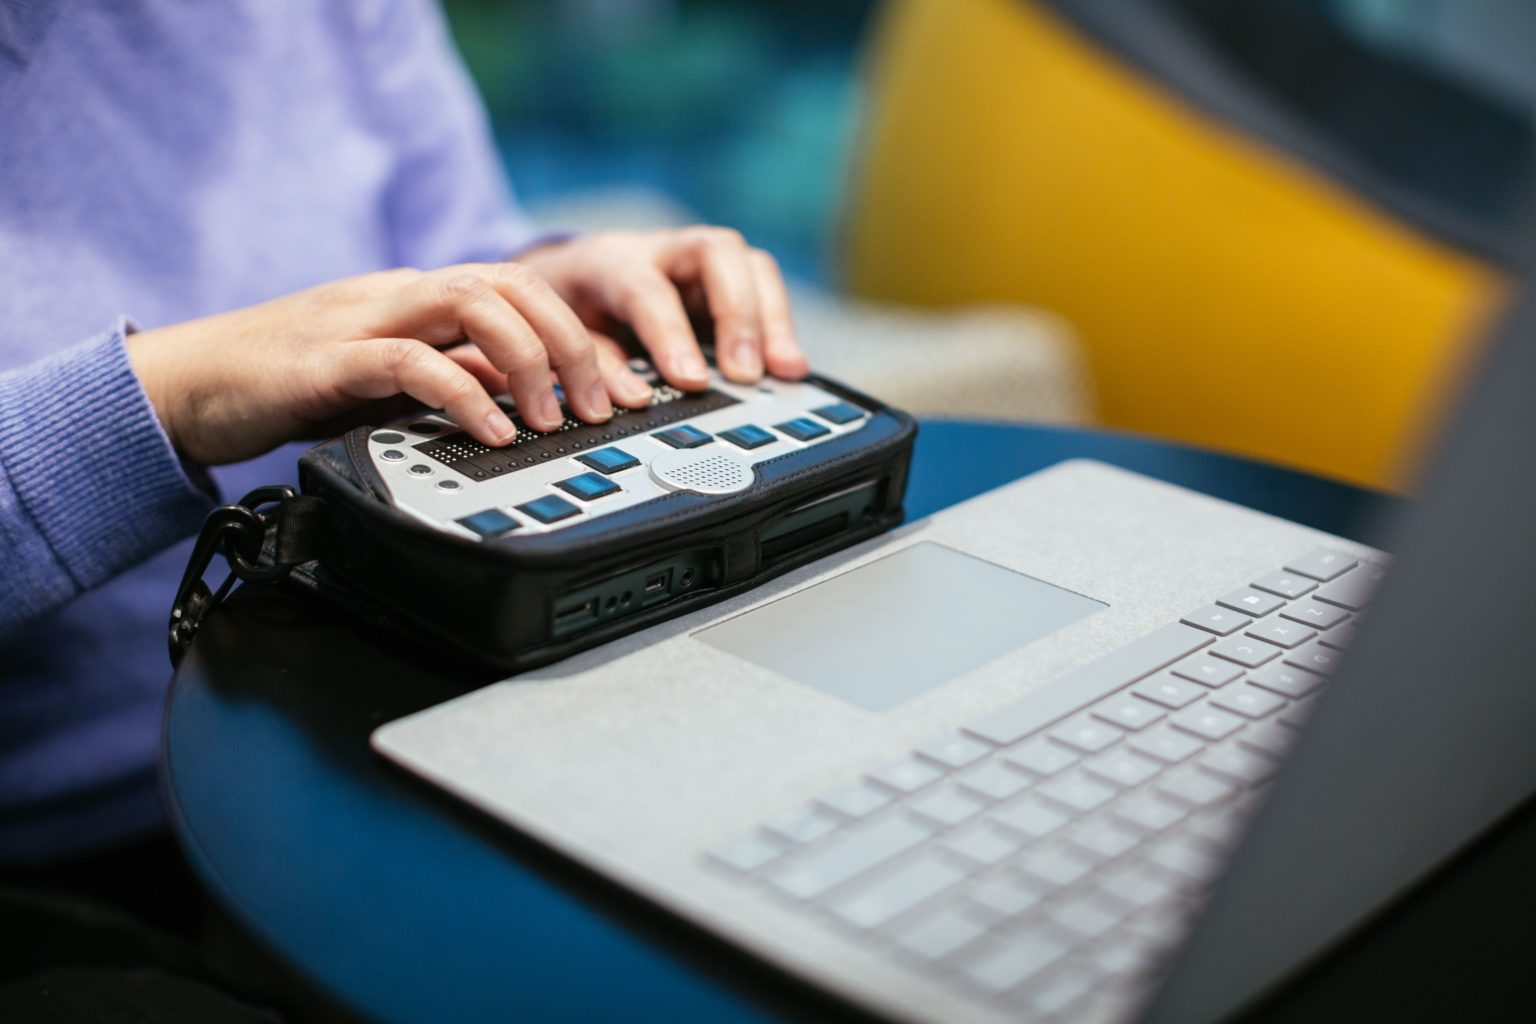 Anne Taylor, a woman who is blind, uses a braille keyboard with a Surface device